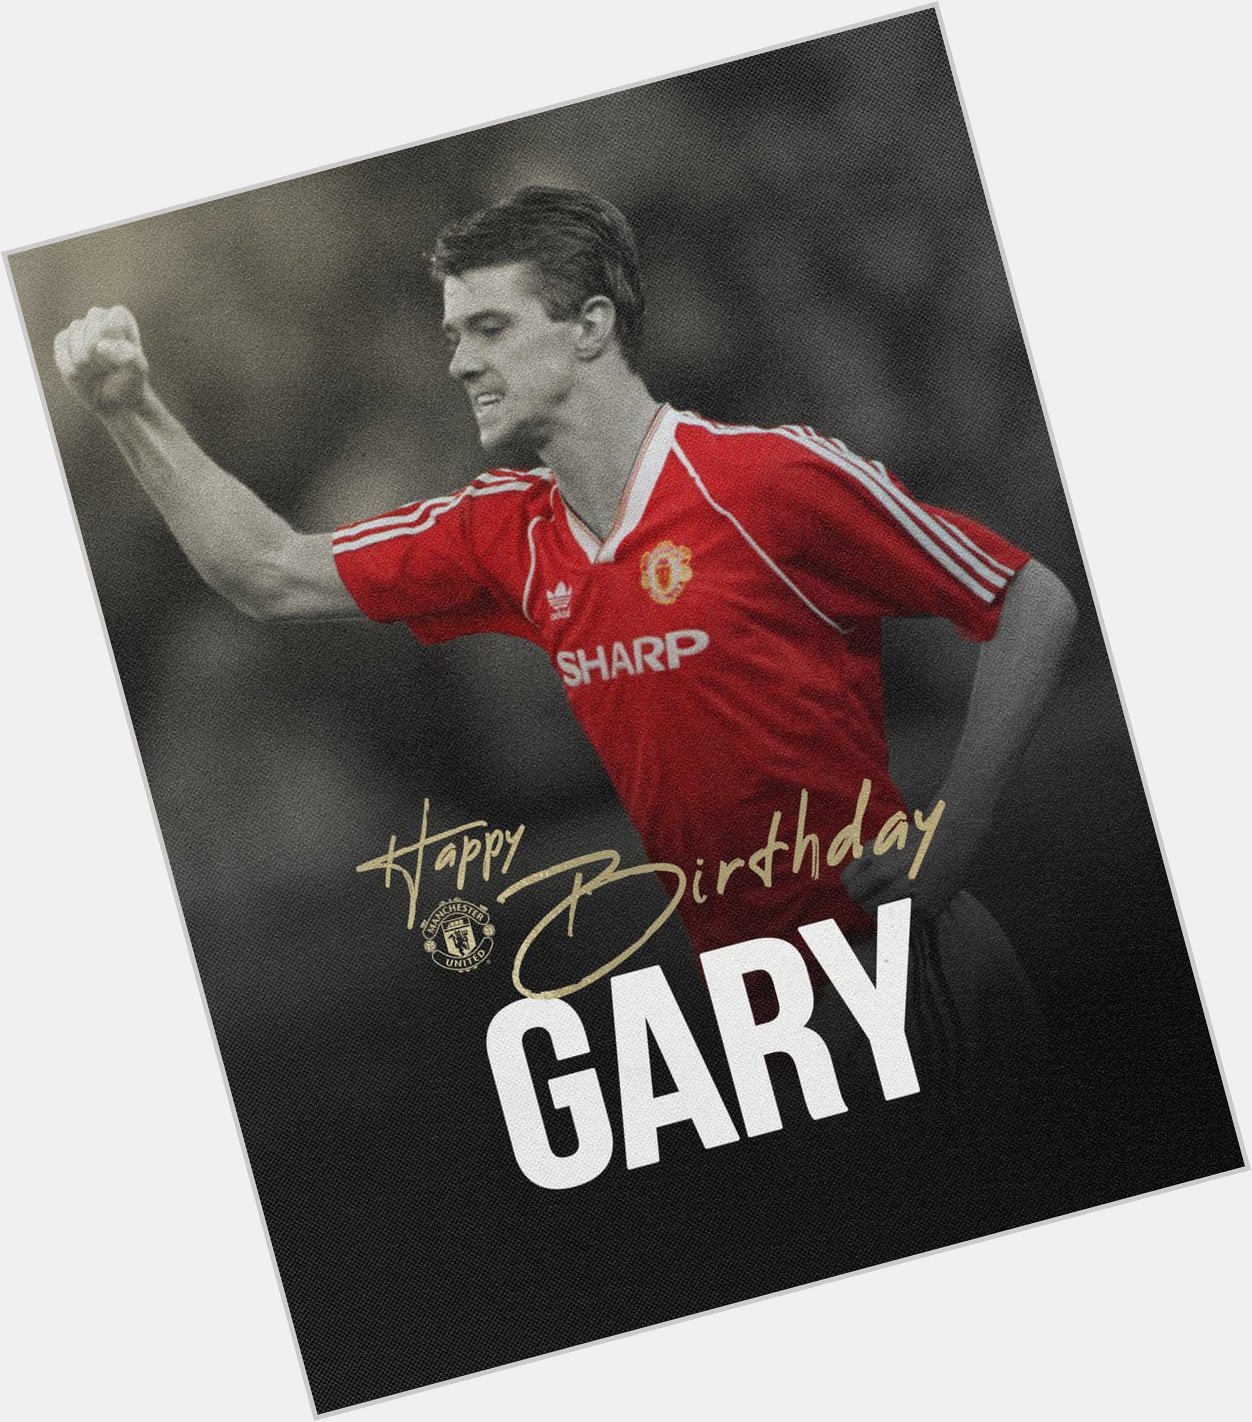 Happy 56th birthday to our former defender Gary Pallister!  